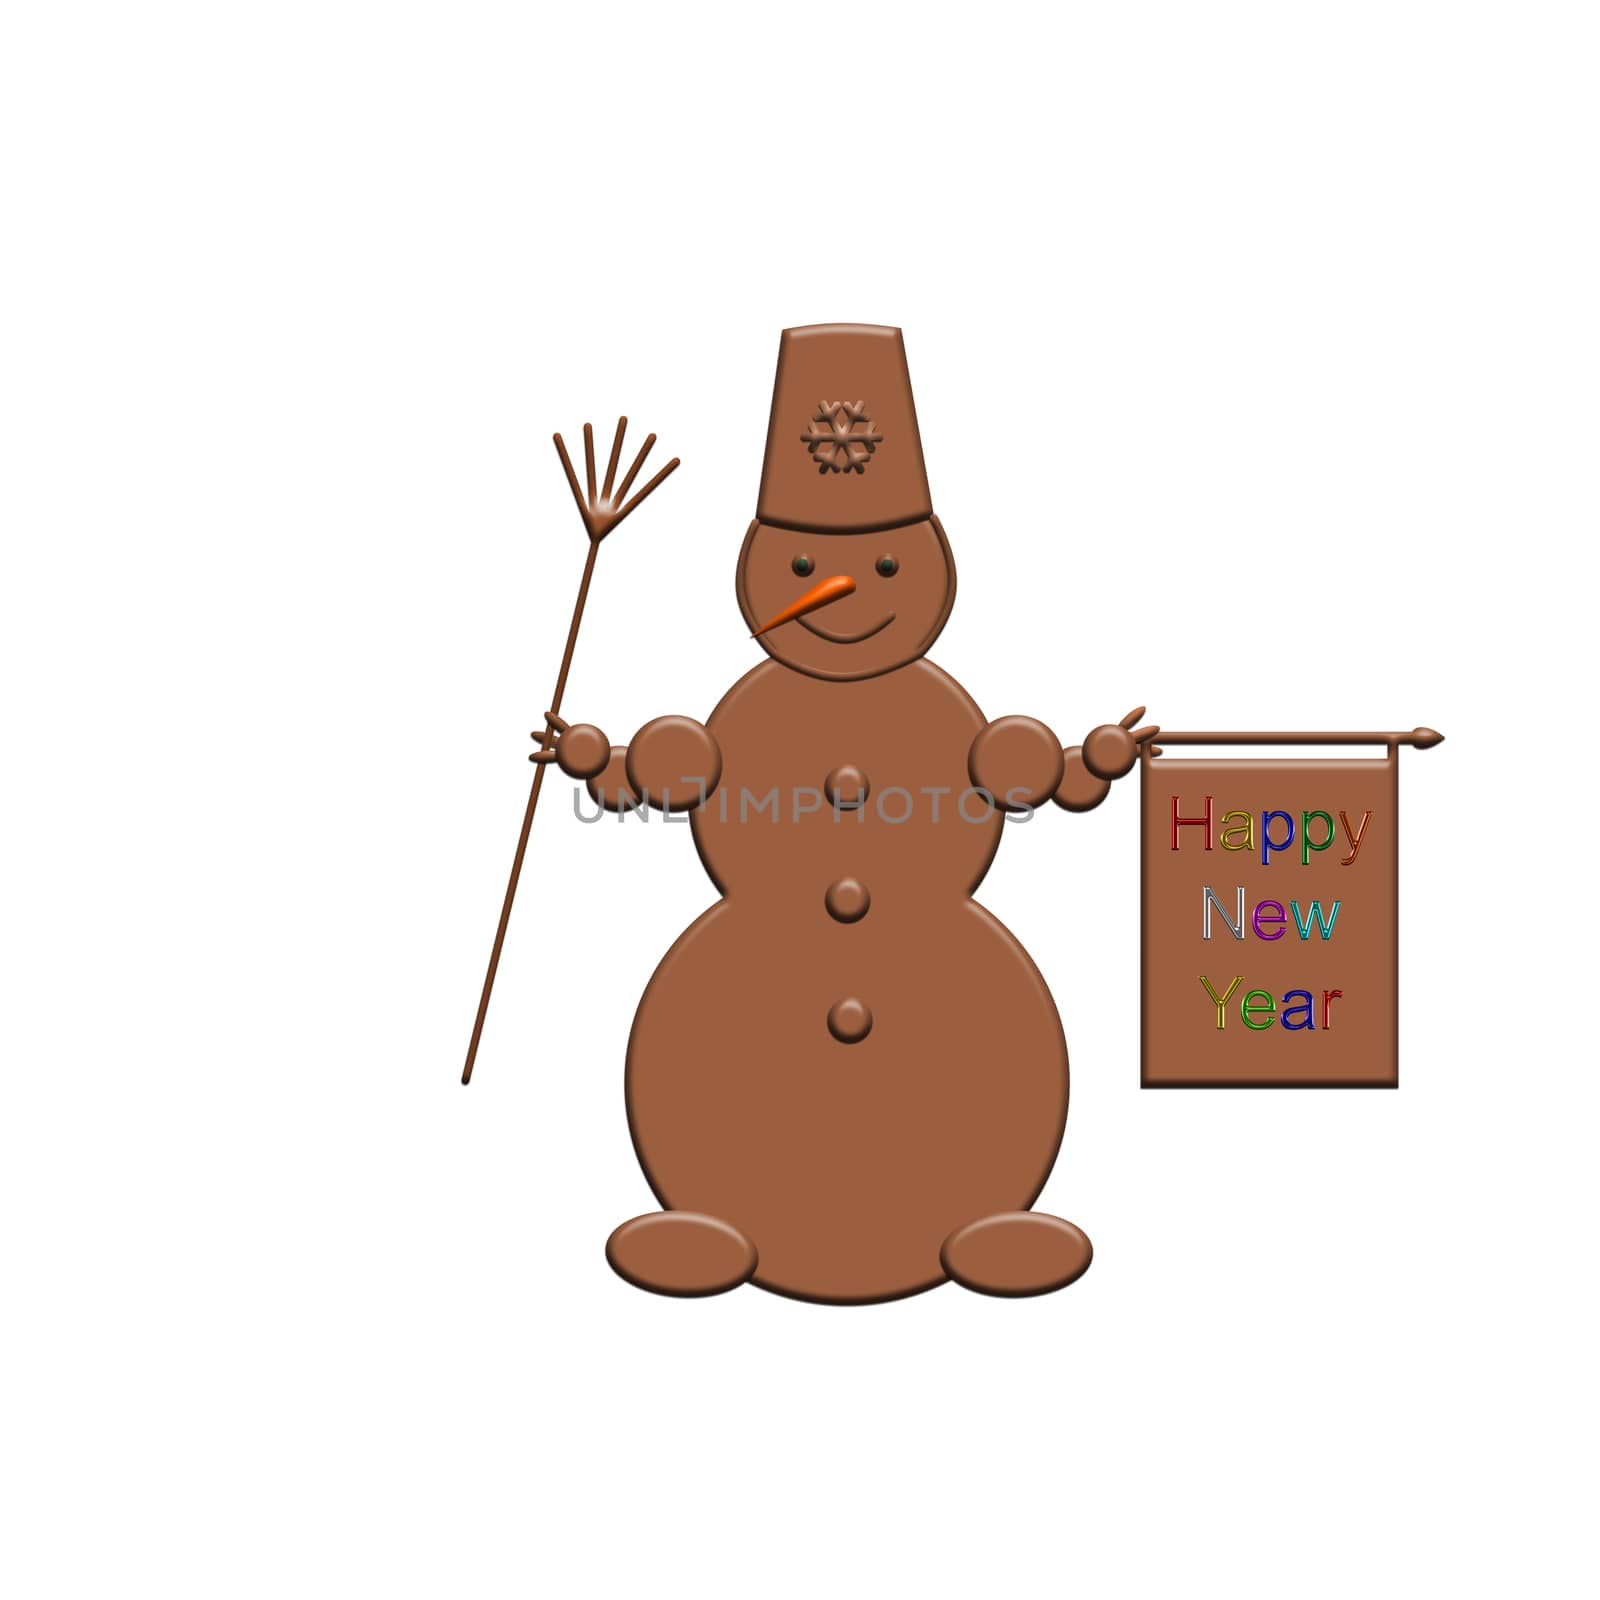 Snowman of chocolate on a white background with a greeting